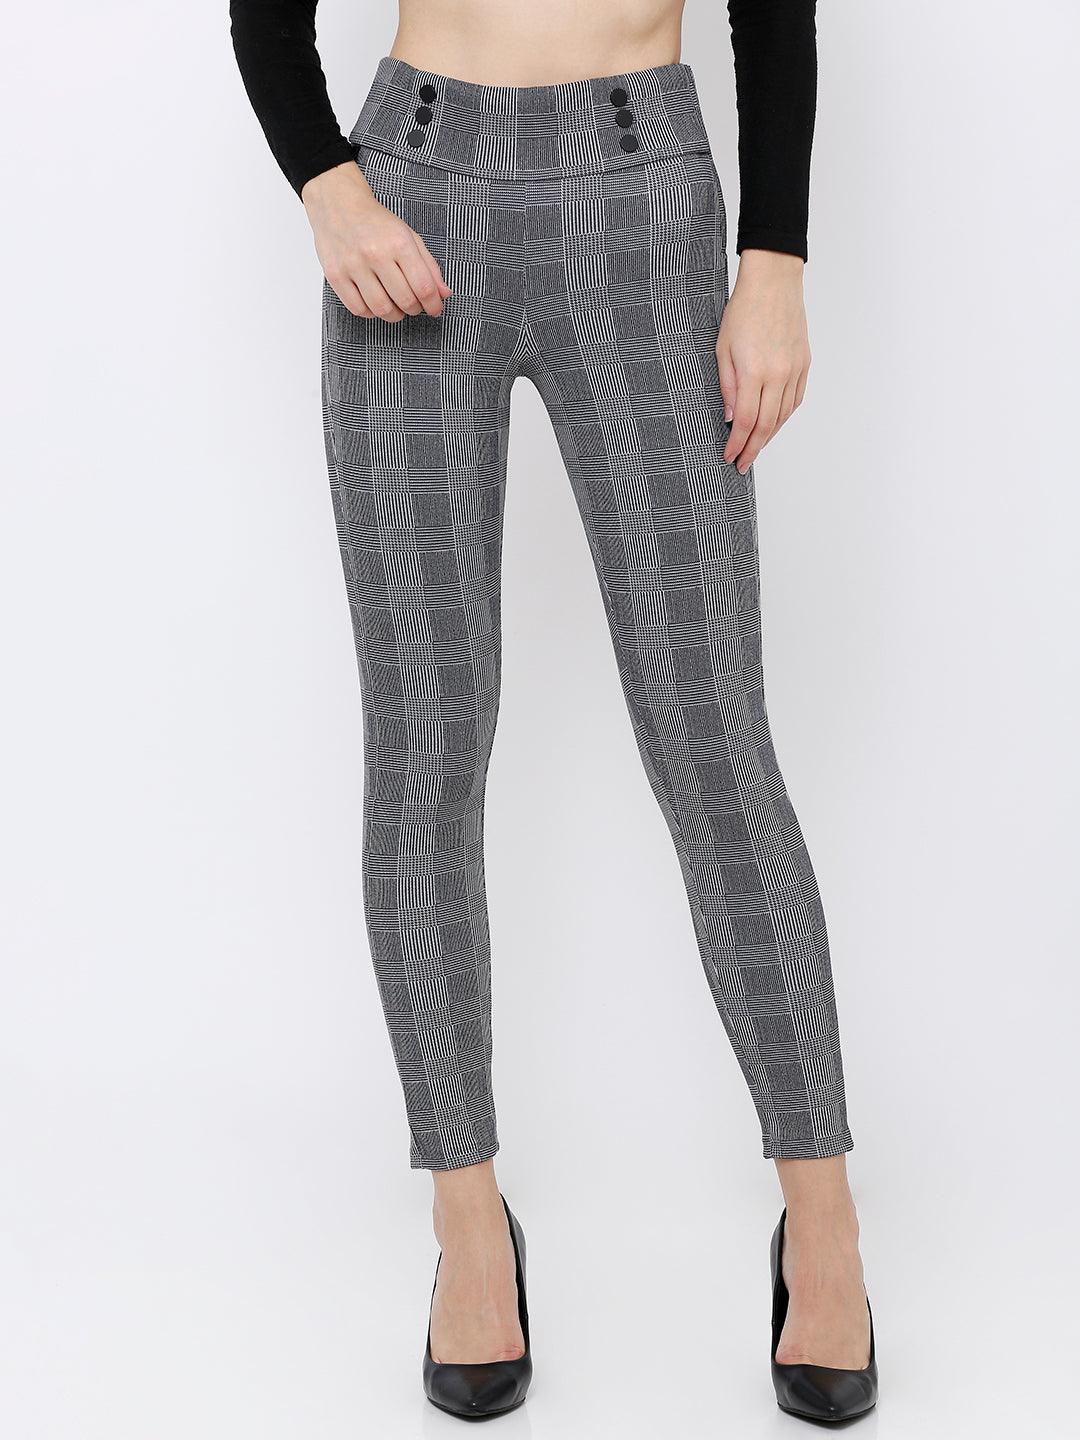 grey check leggings - A Well Styled Life®